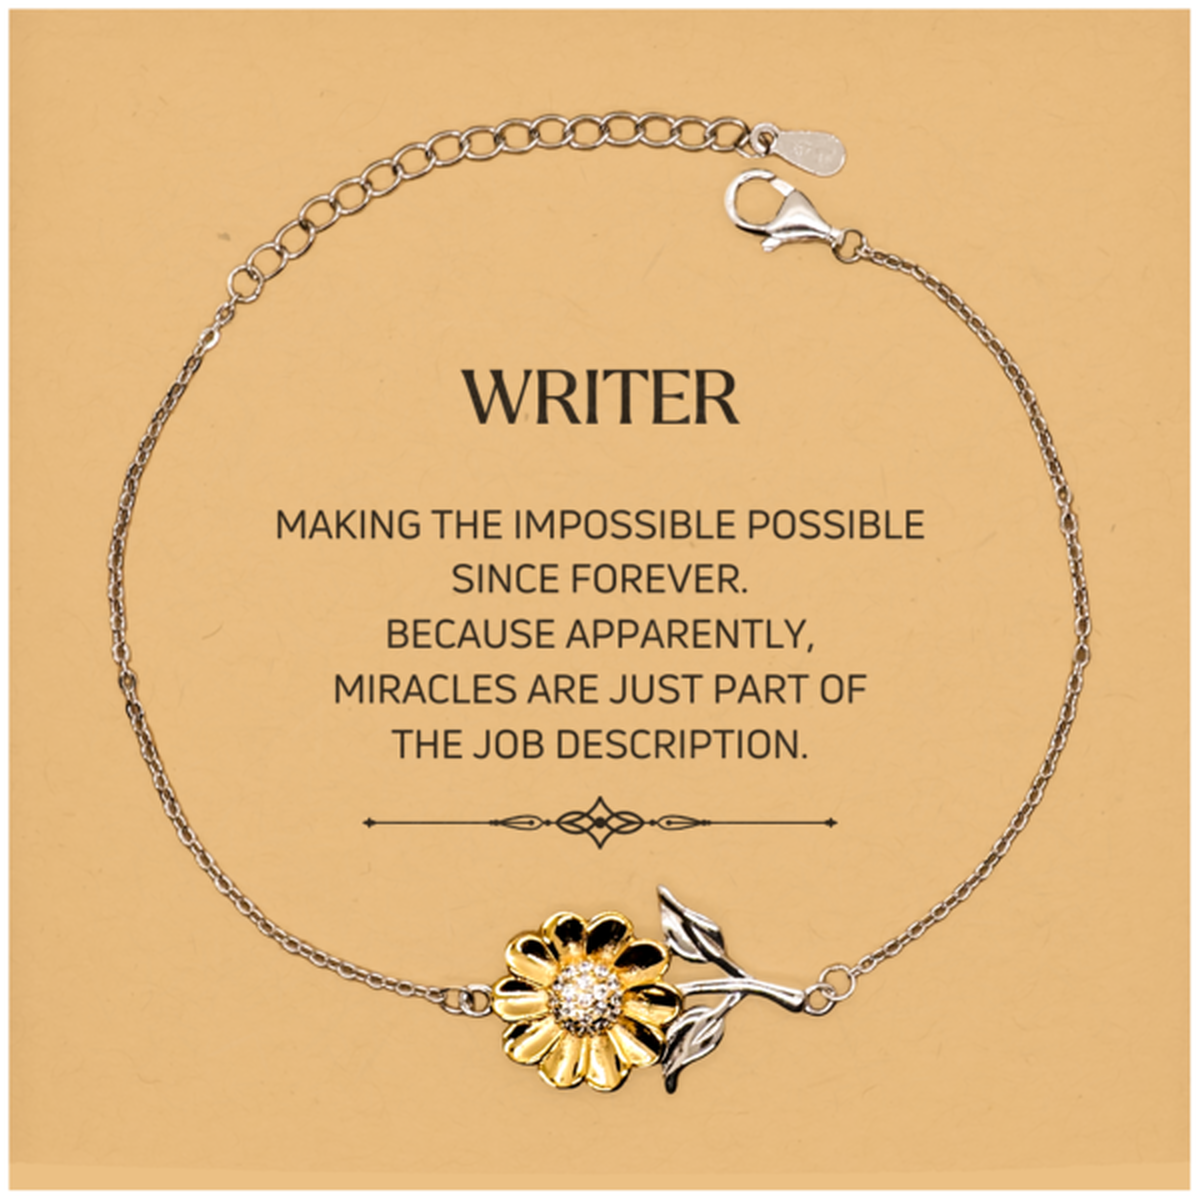 Funny Writer Gifts, Miracles are just part of the job description, Inspirational Birthday Christmas Sunflower Bracelet For Writer, Men, Women, Coworkers, Friends, Boss